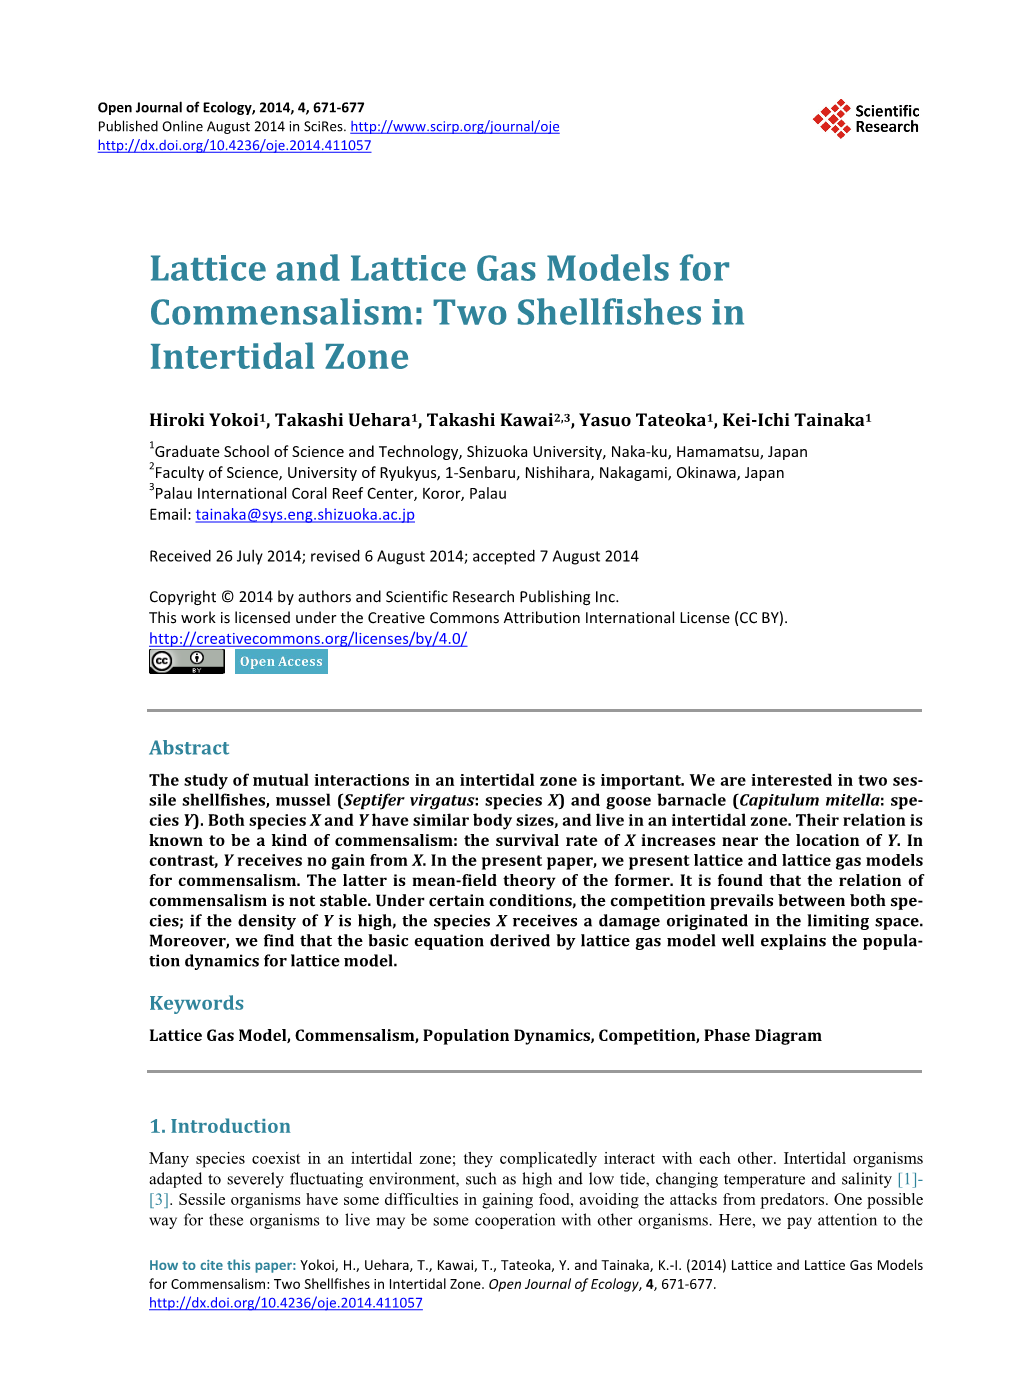 Lattice and Lattice Gas Models for Commensalism: Two Shellfishes in Intertidal Zone